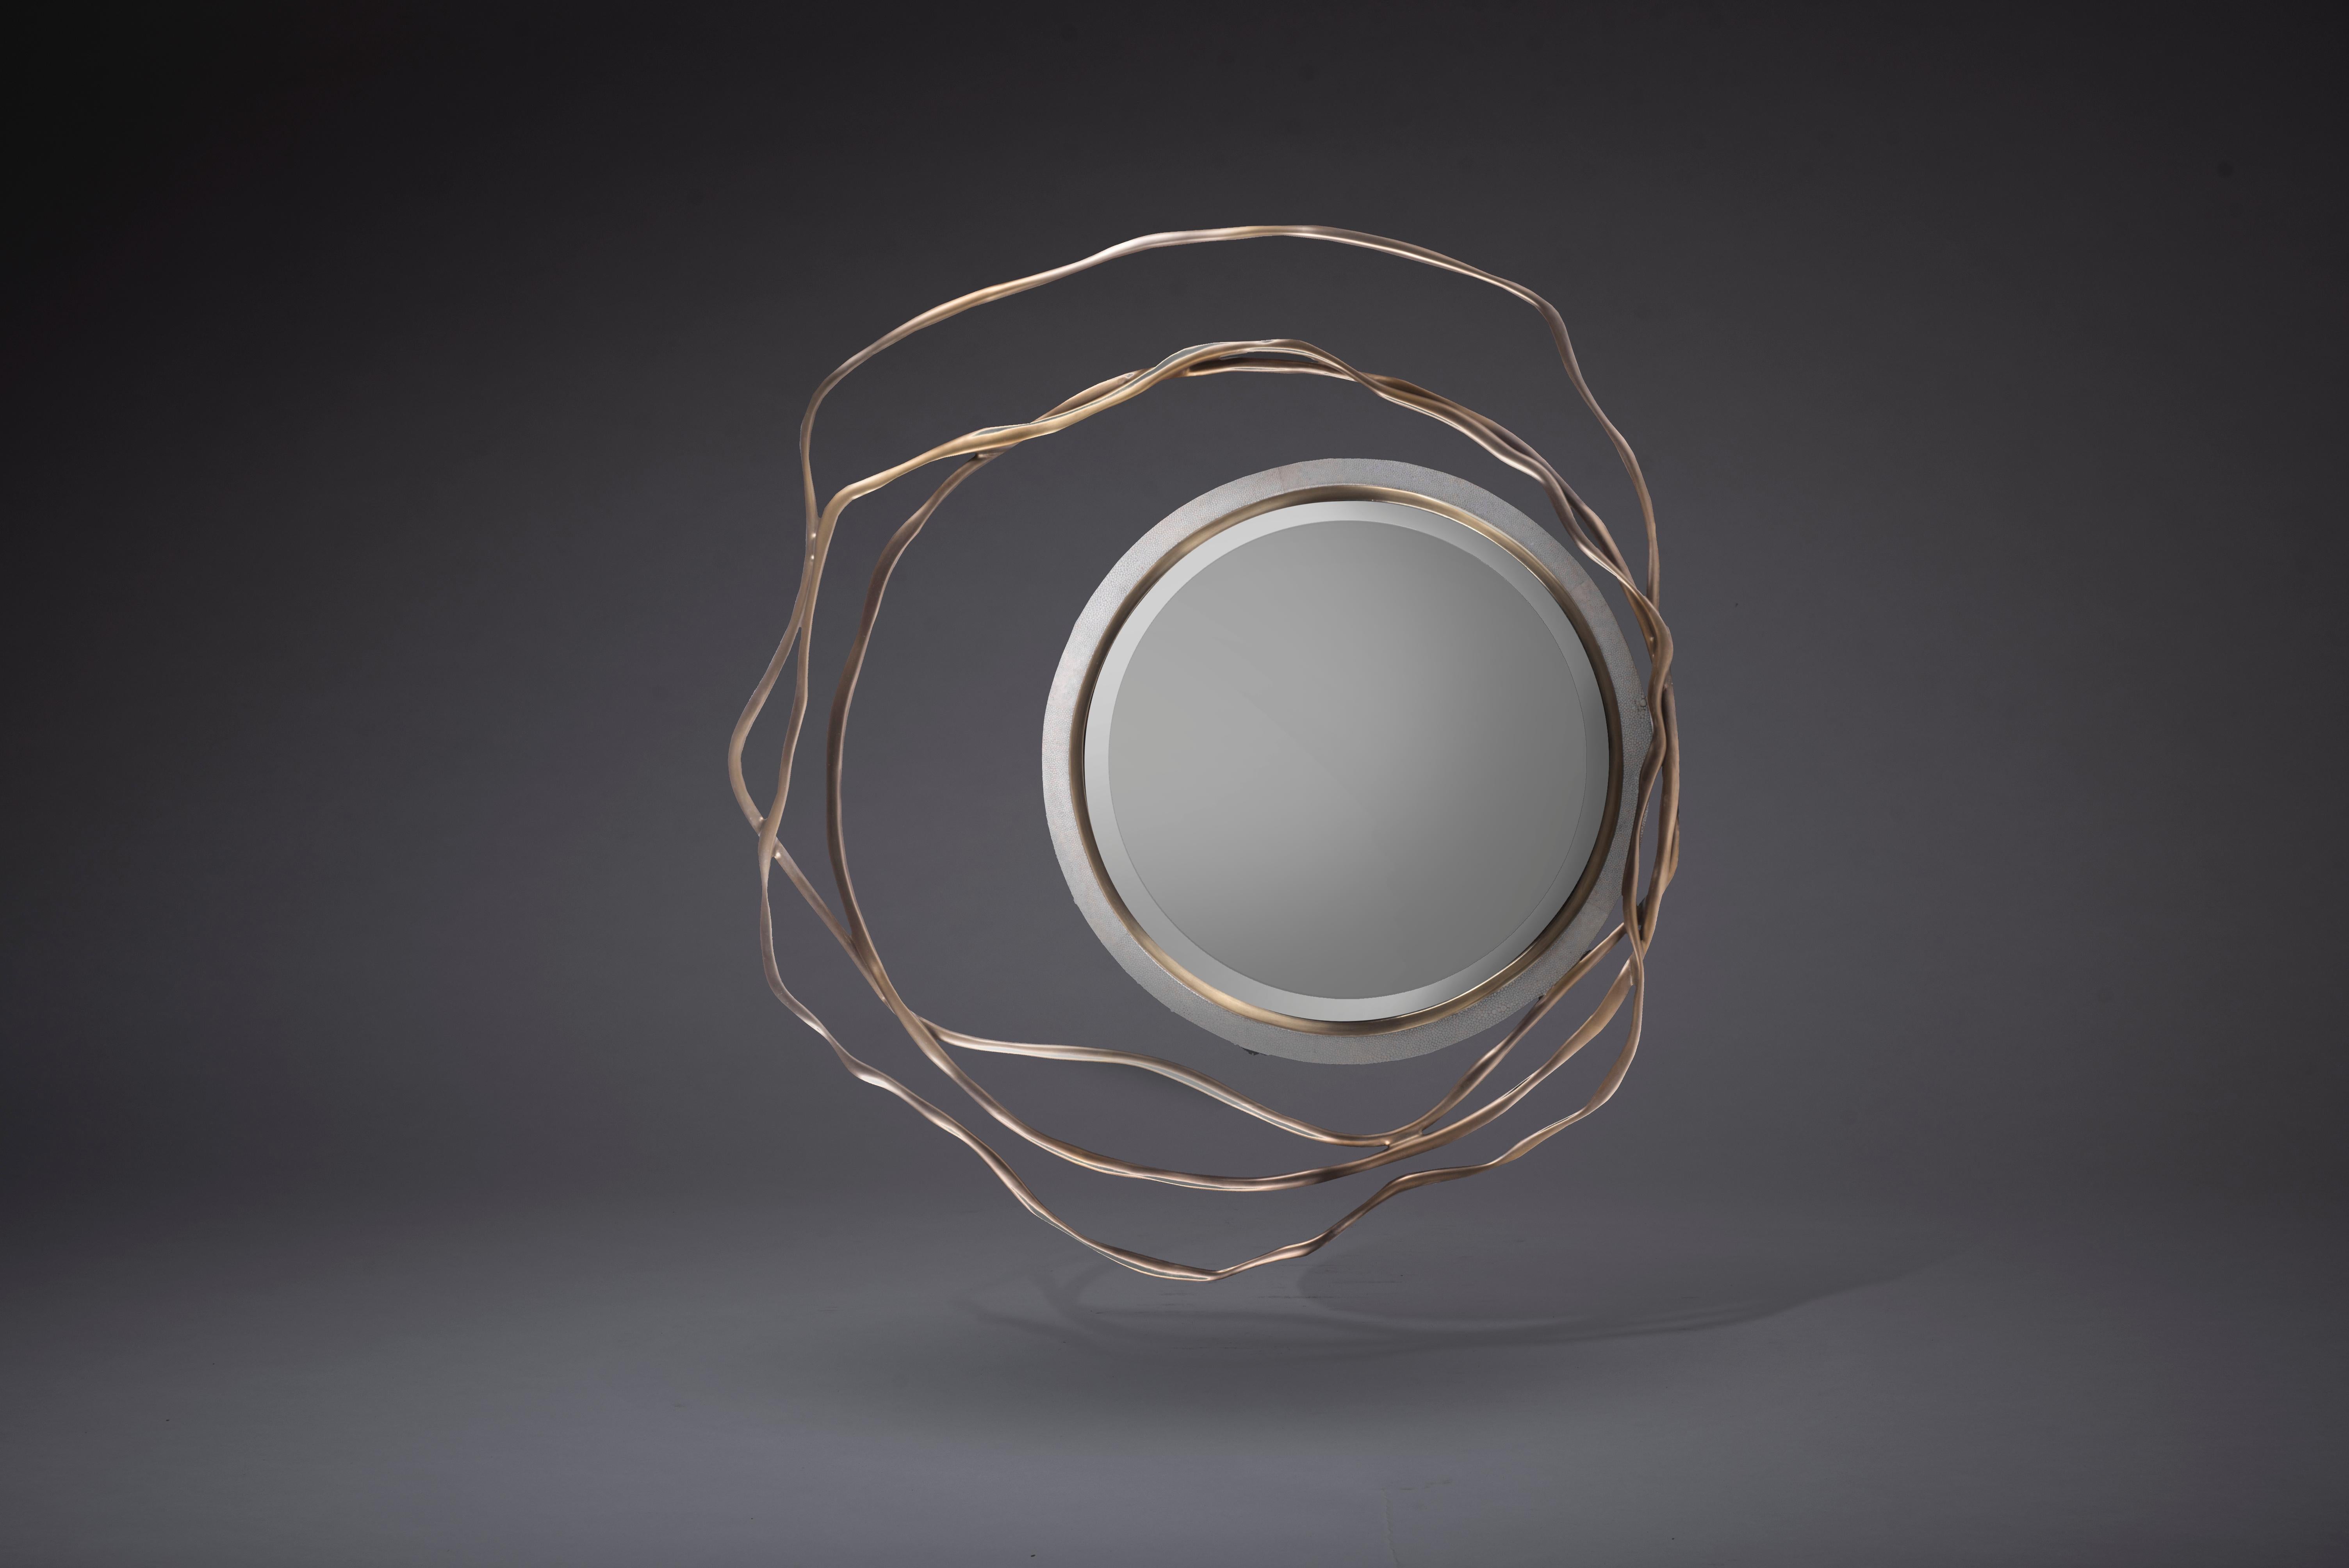 The Dargelos mirror is a statement piece with its ethereal inspired roots. The intertwinement of the twisted bronze-patina brass wires, against the circular cream shagreen frame of the mirror creates a truly whimsical feel, white retaining it's